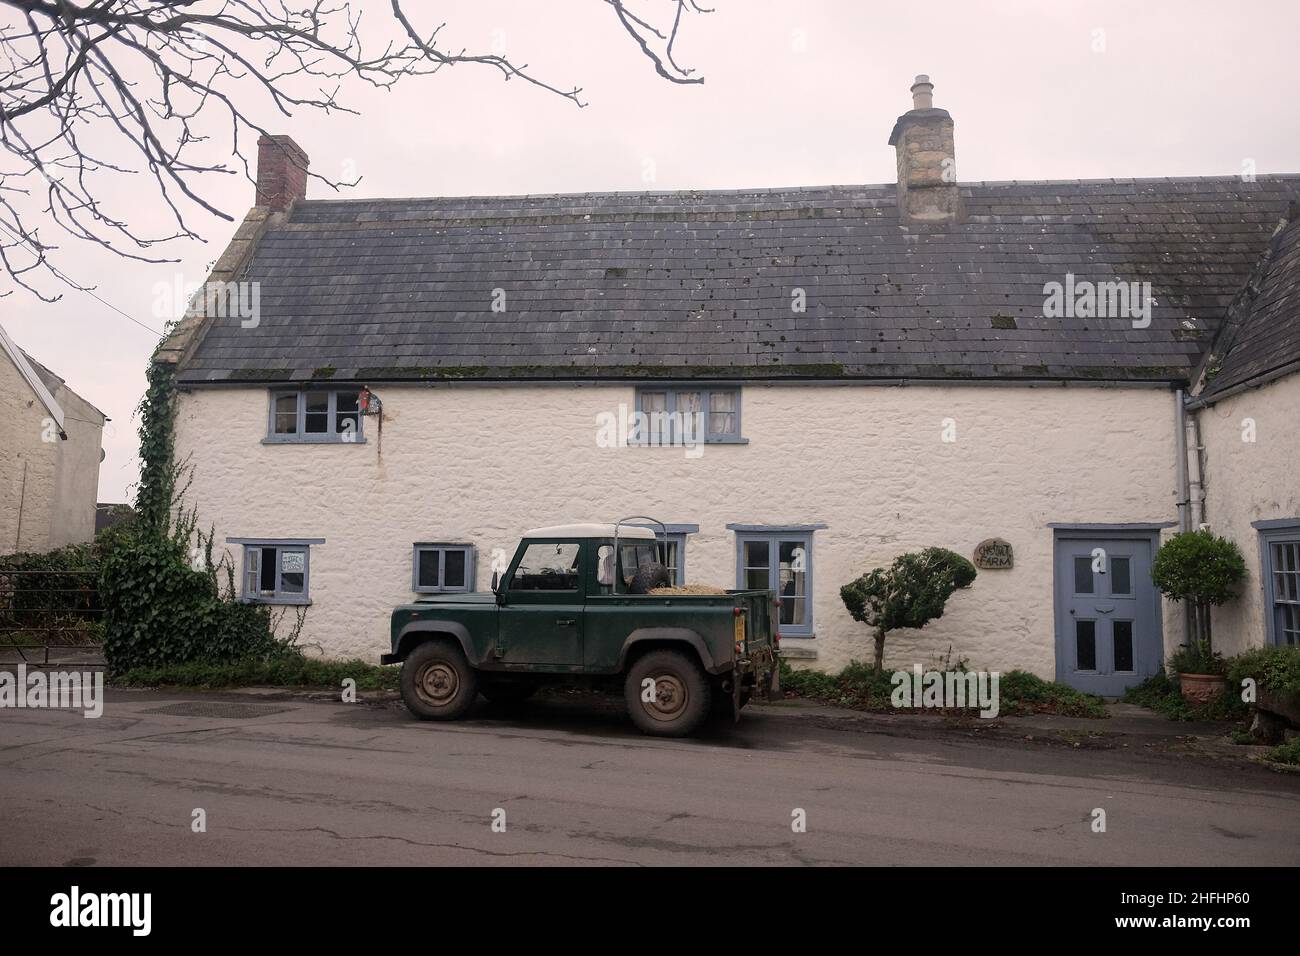 January 2022 - Traditional cottage in the rural Somerset village of Cheddar, with a working Land Rover parked outside Stock Photo